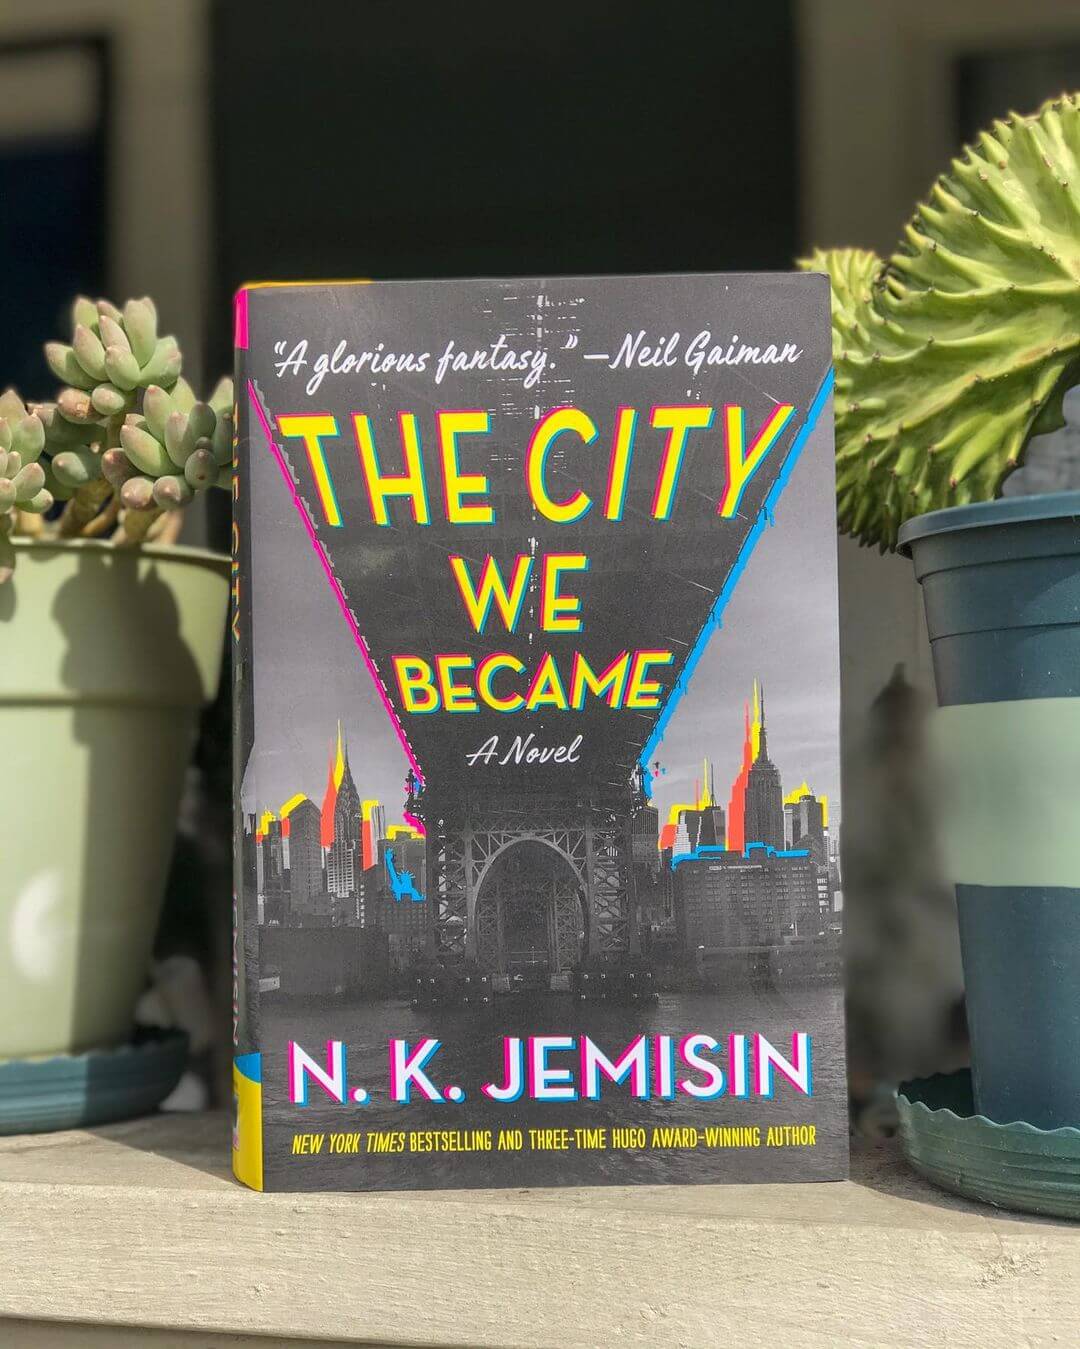 The city we became by N.K. Jemisin